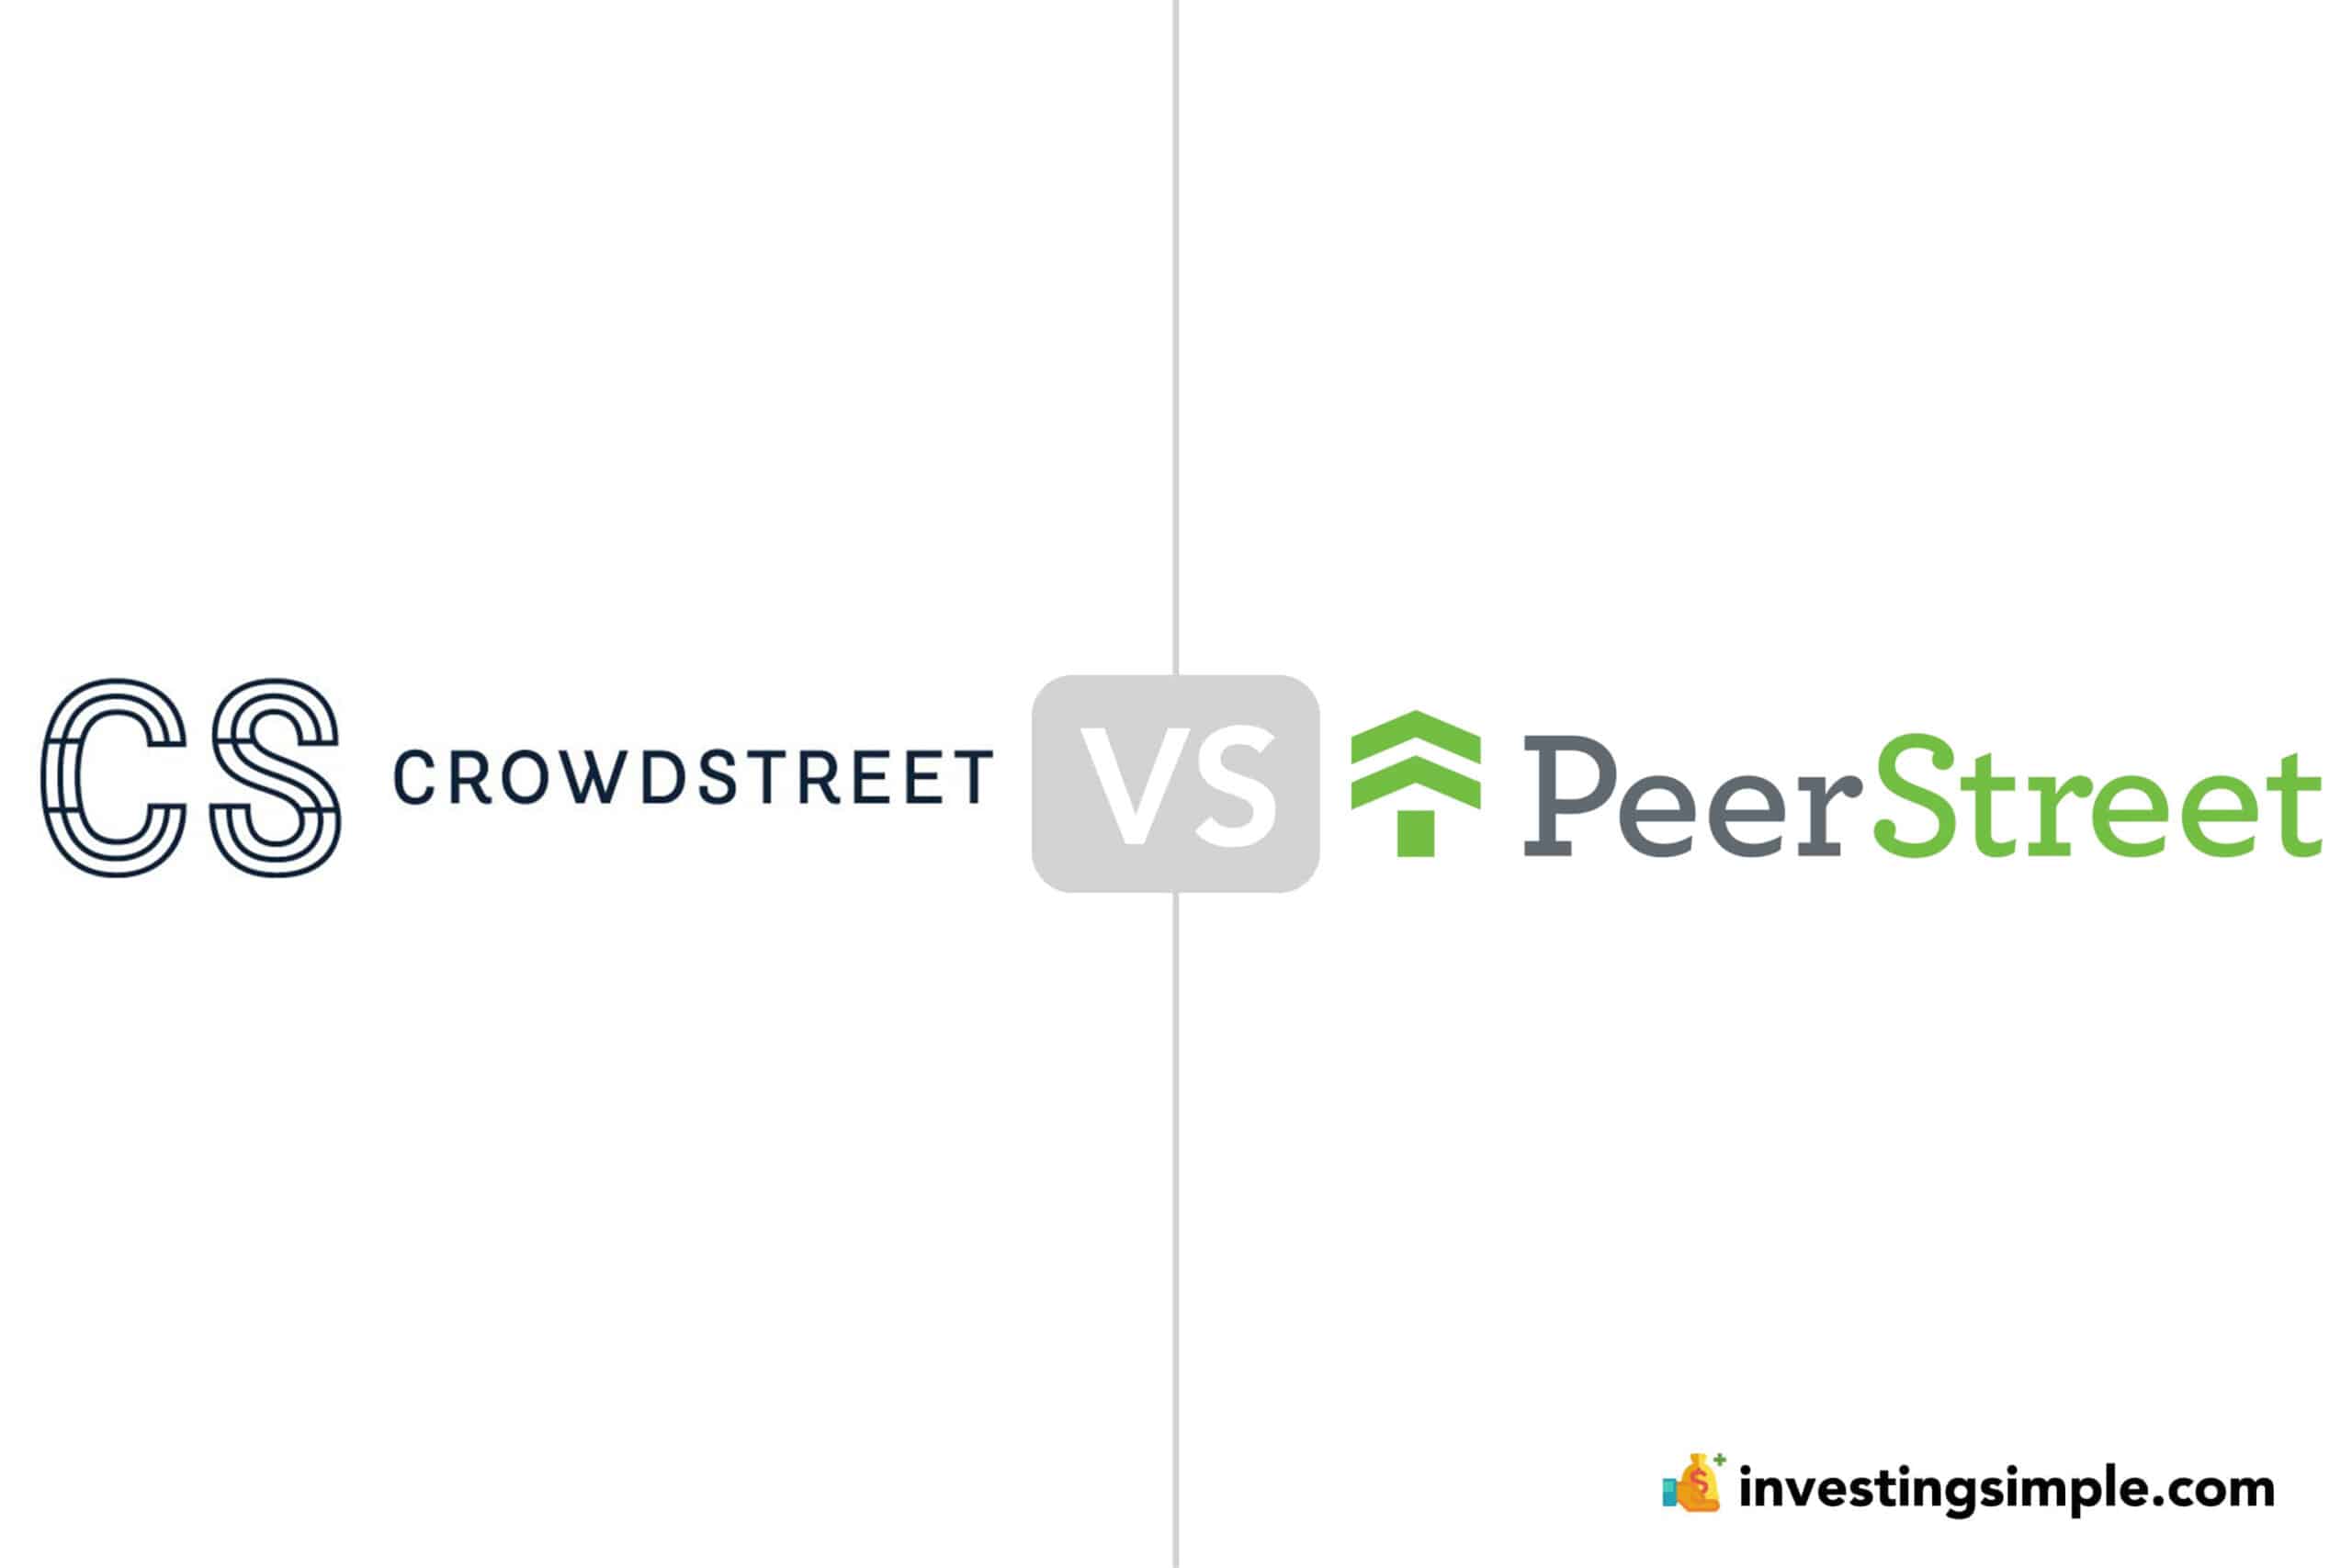 crowdstreet vs peerstreet which is a better investment